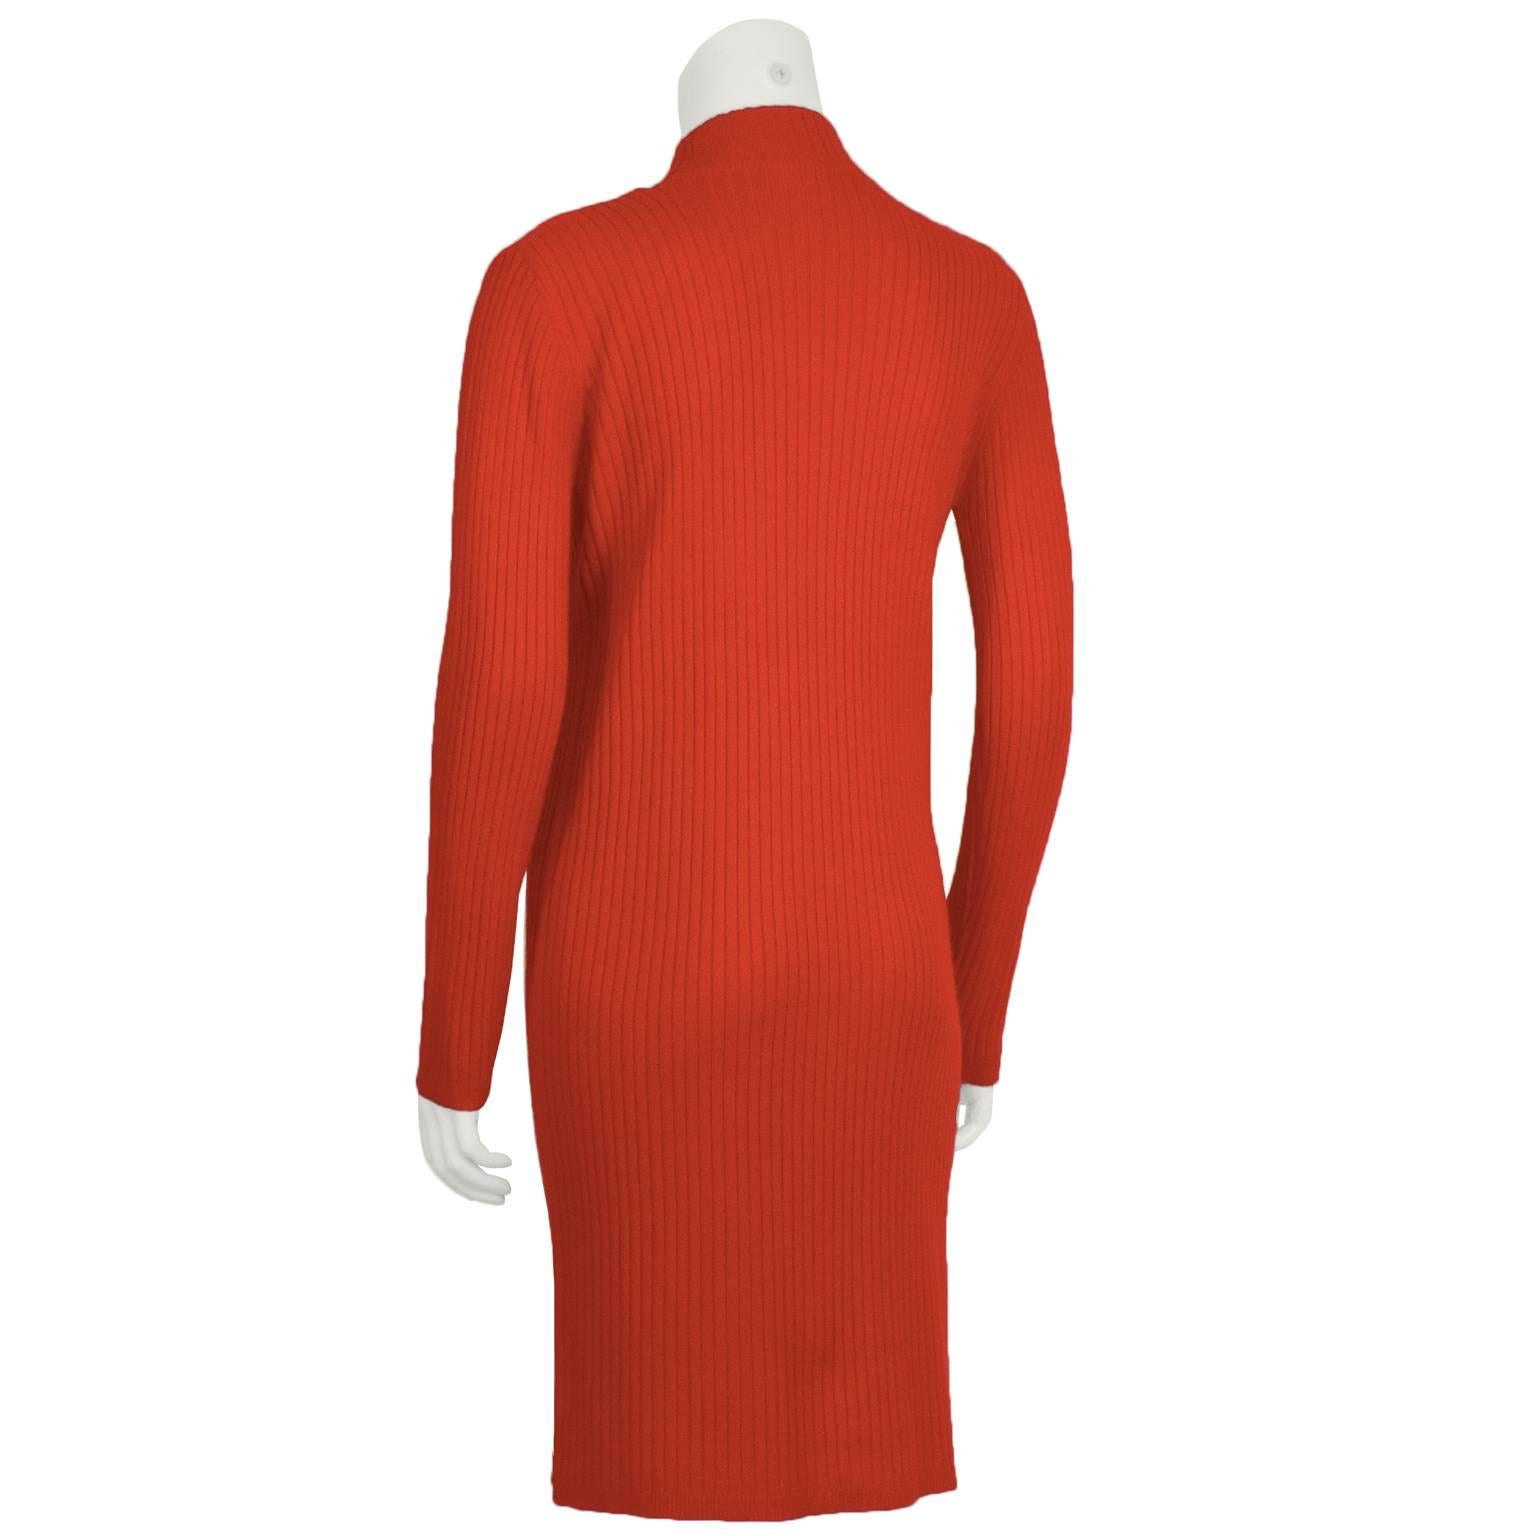 Courreges 1980’s ribbed wool mock turtleneck sweater dress. A classic Courreges style reissued 20 years after the first iconic RTW space age knits hit the runway. Courreges signature white embroidered logo sewn on below the mock turtle neck. In